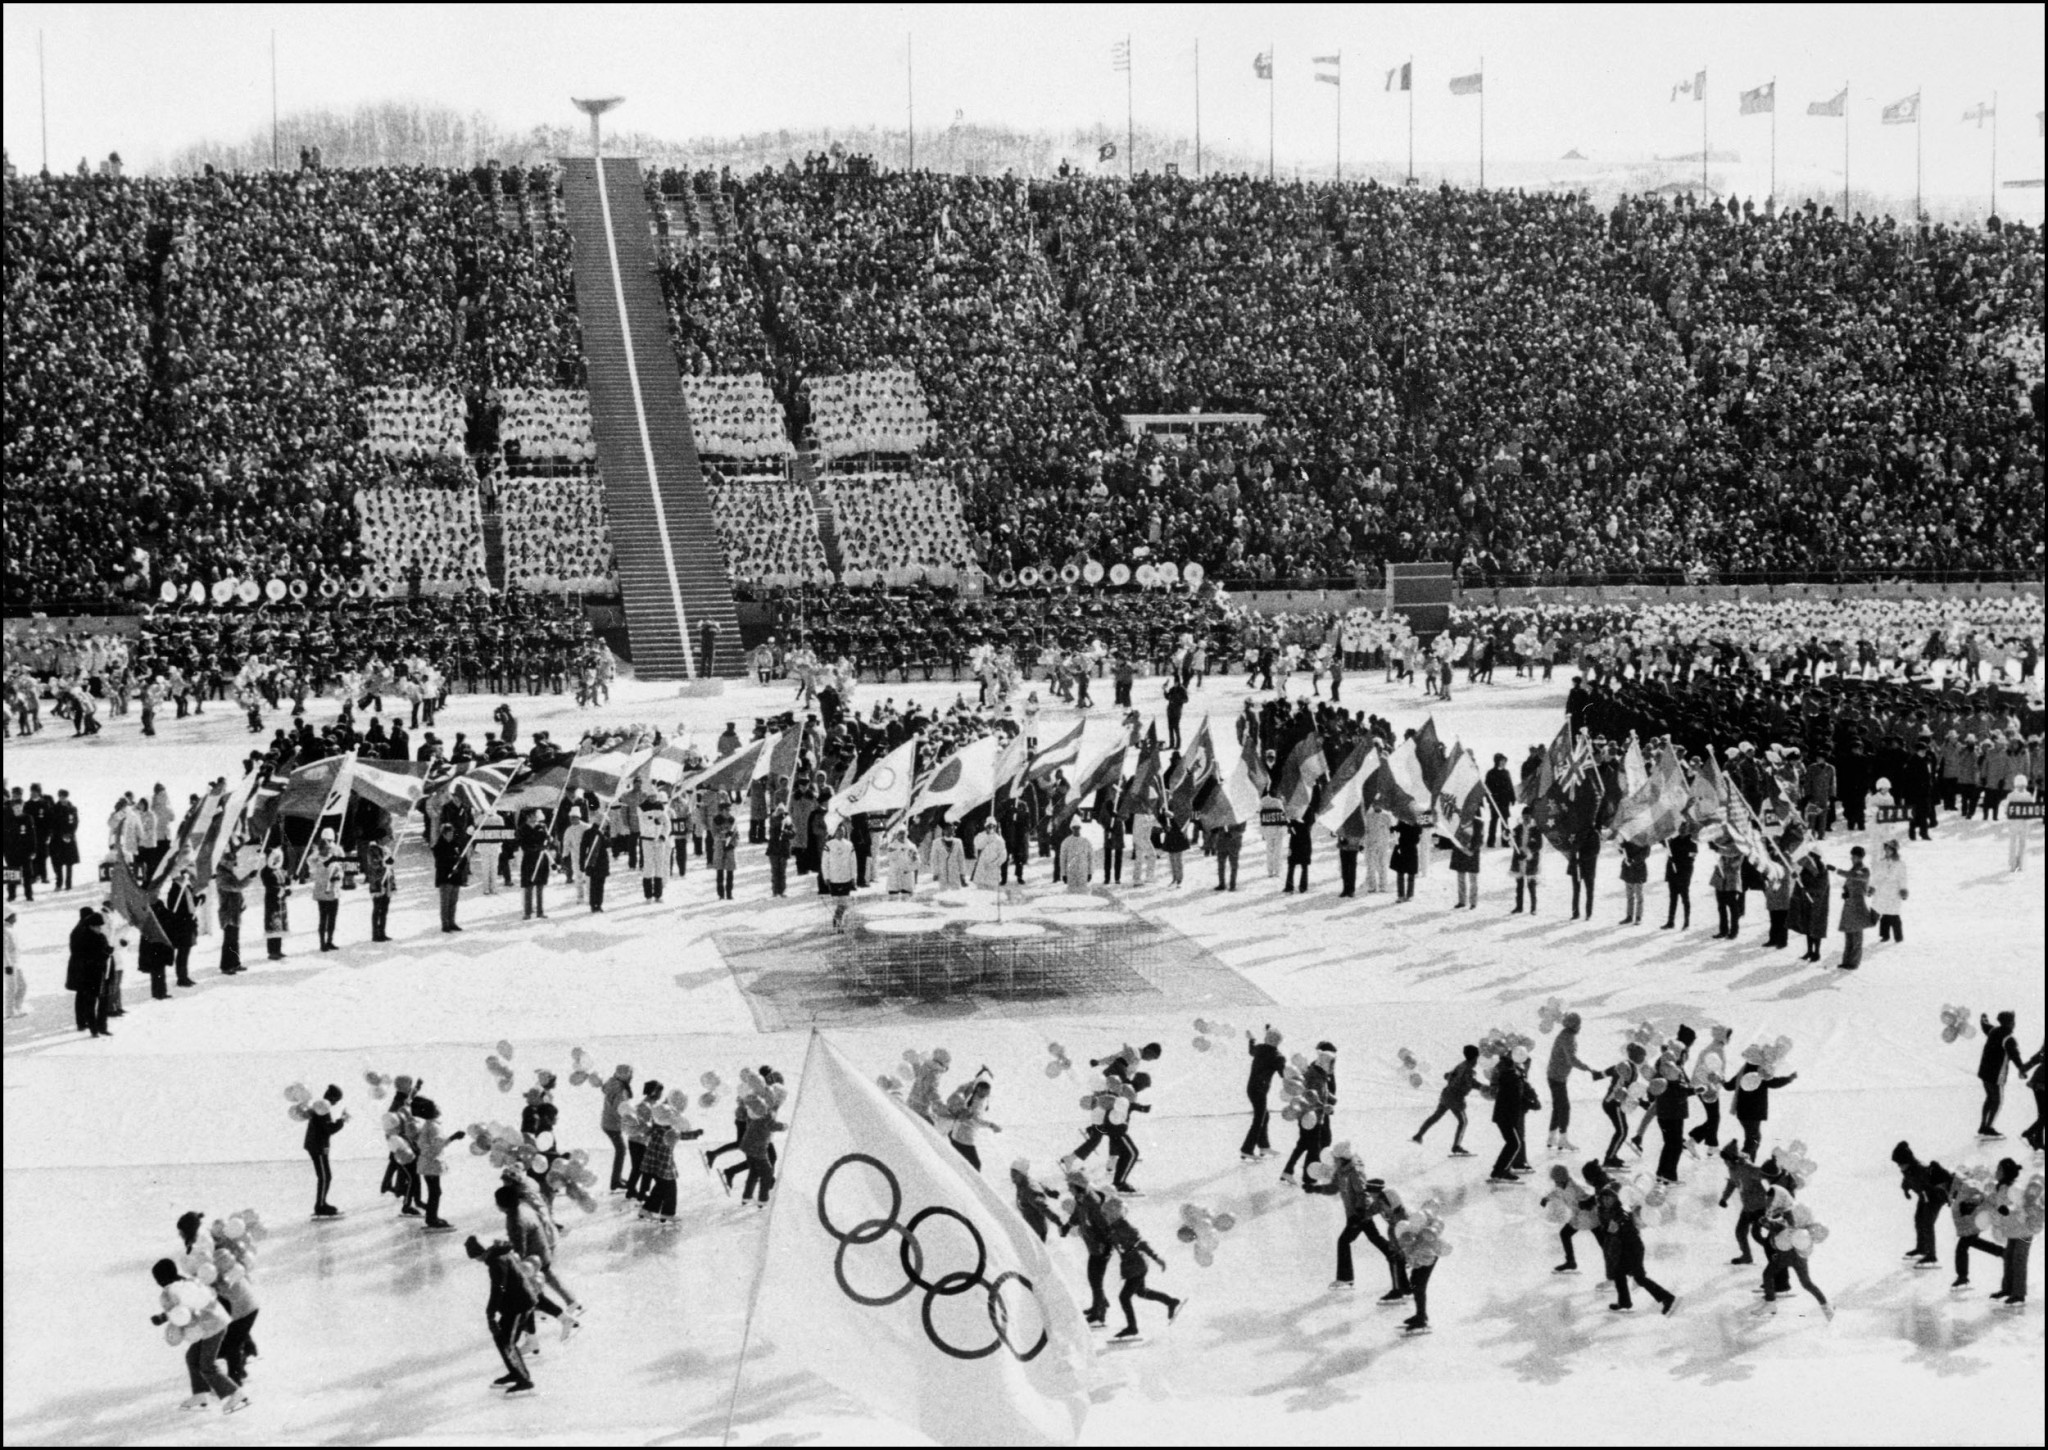 In 1972 Sapporo was the first Asian city to host the Winter Olympics and is now bidding to stage them again in 2030 ©Getty Images